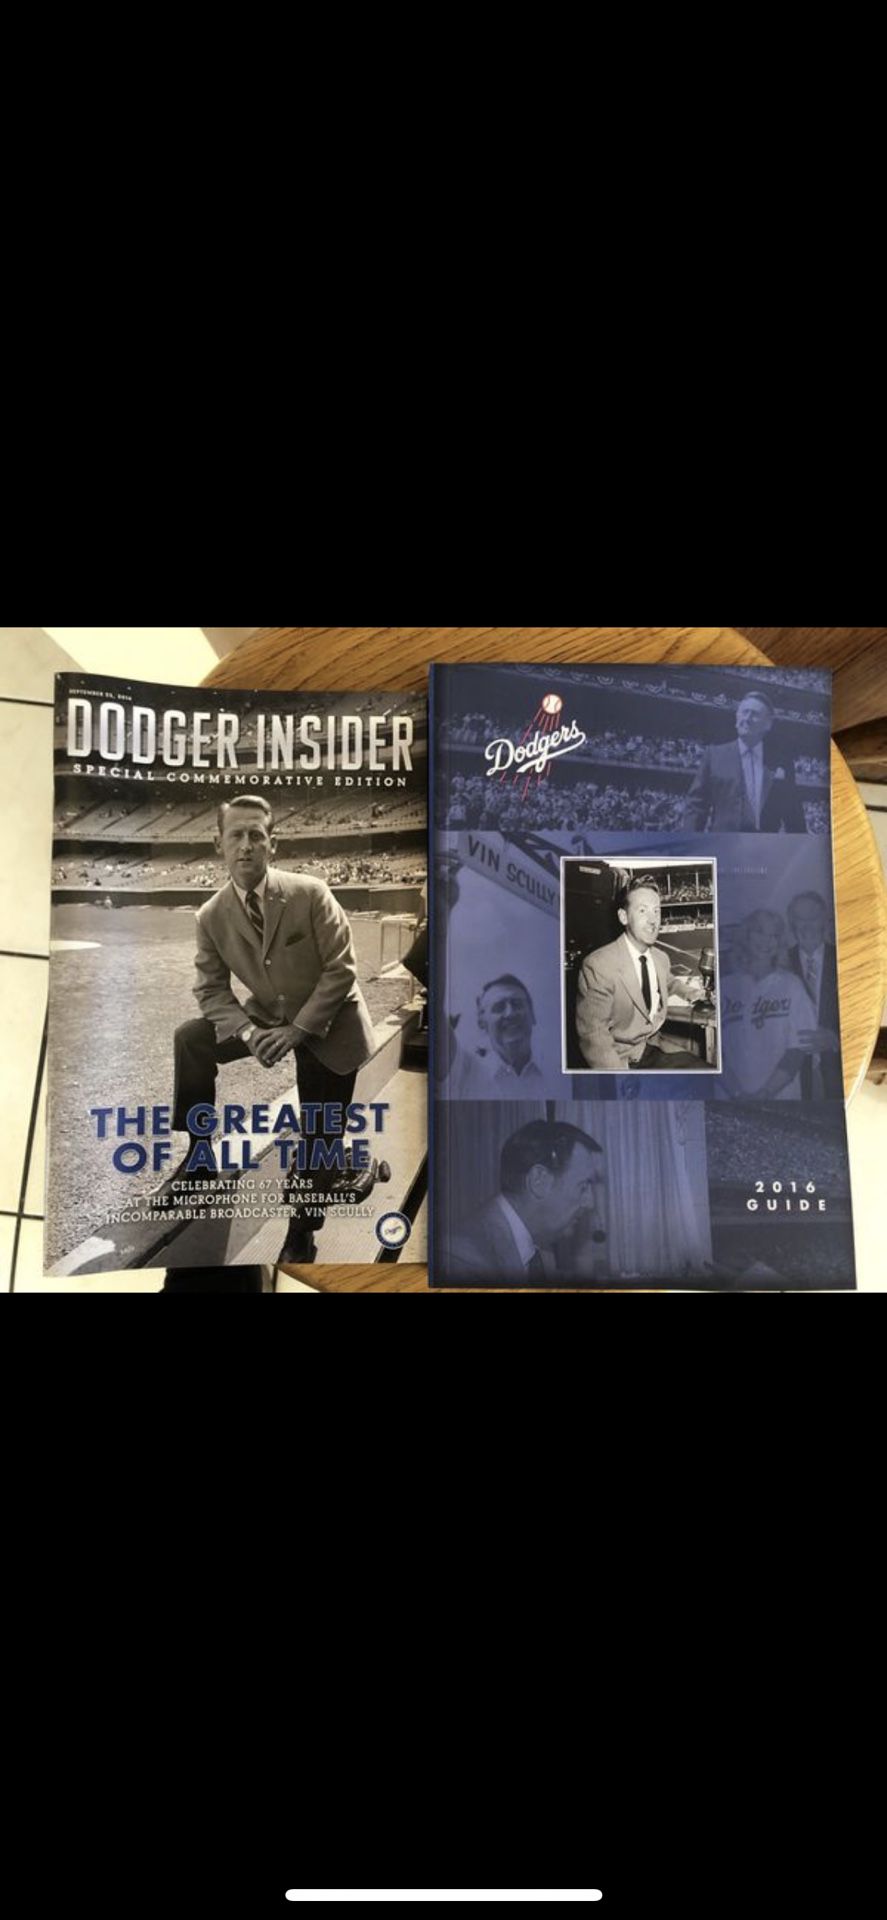 Dodgers 2016 Vin Scully Media Guide and insider 2016